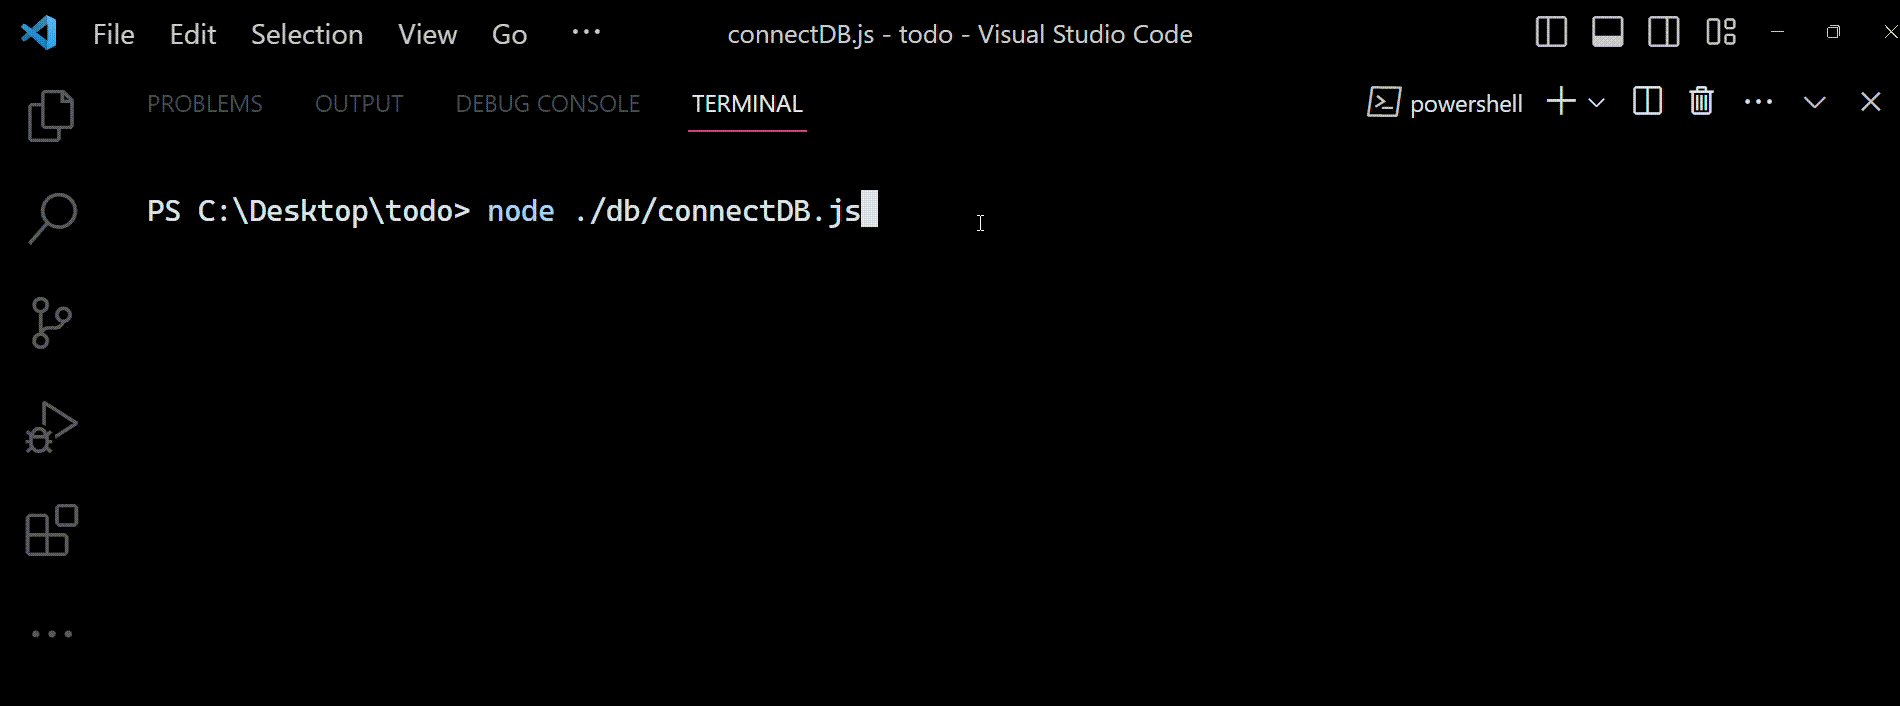 GIF showing the output messages shown in the terminal when the connectDB.js file is executed